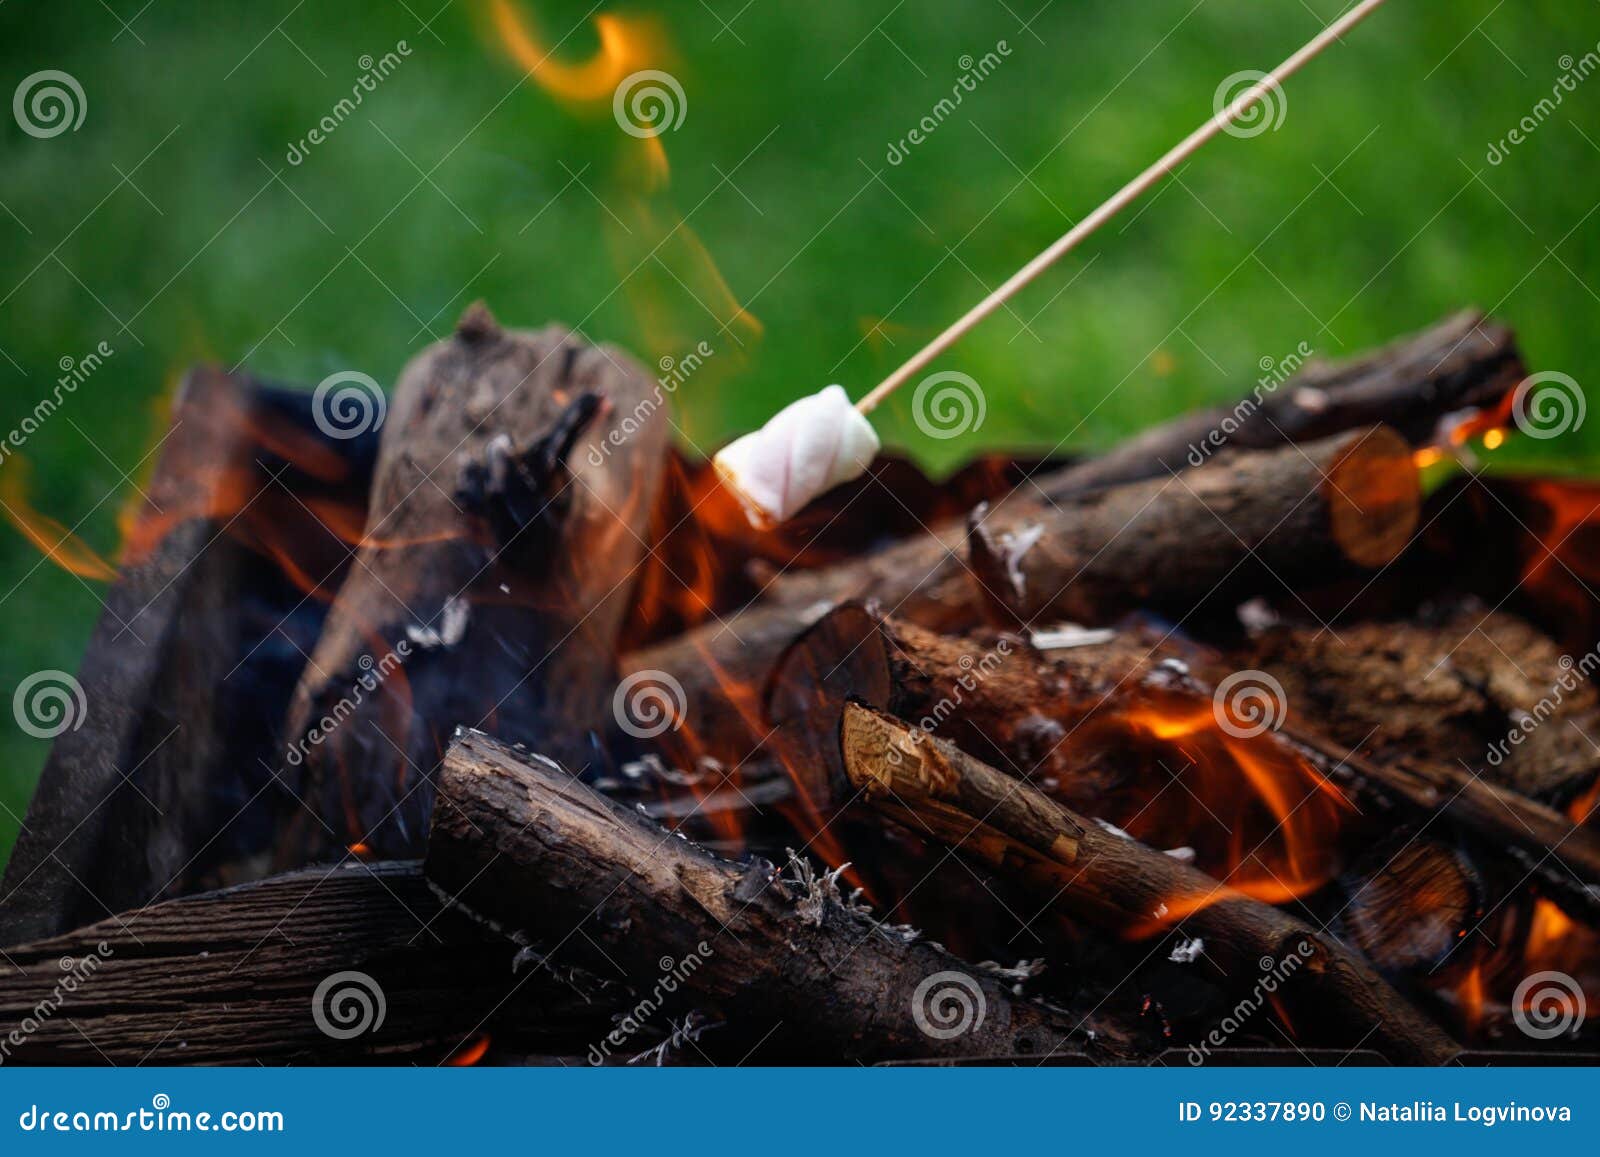 Grilling Marshmallows on Fire Stock Photo - Image of roast, outdoors ...